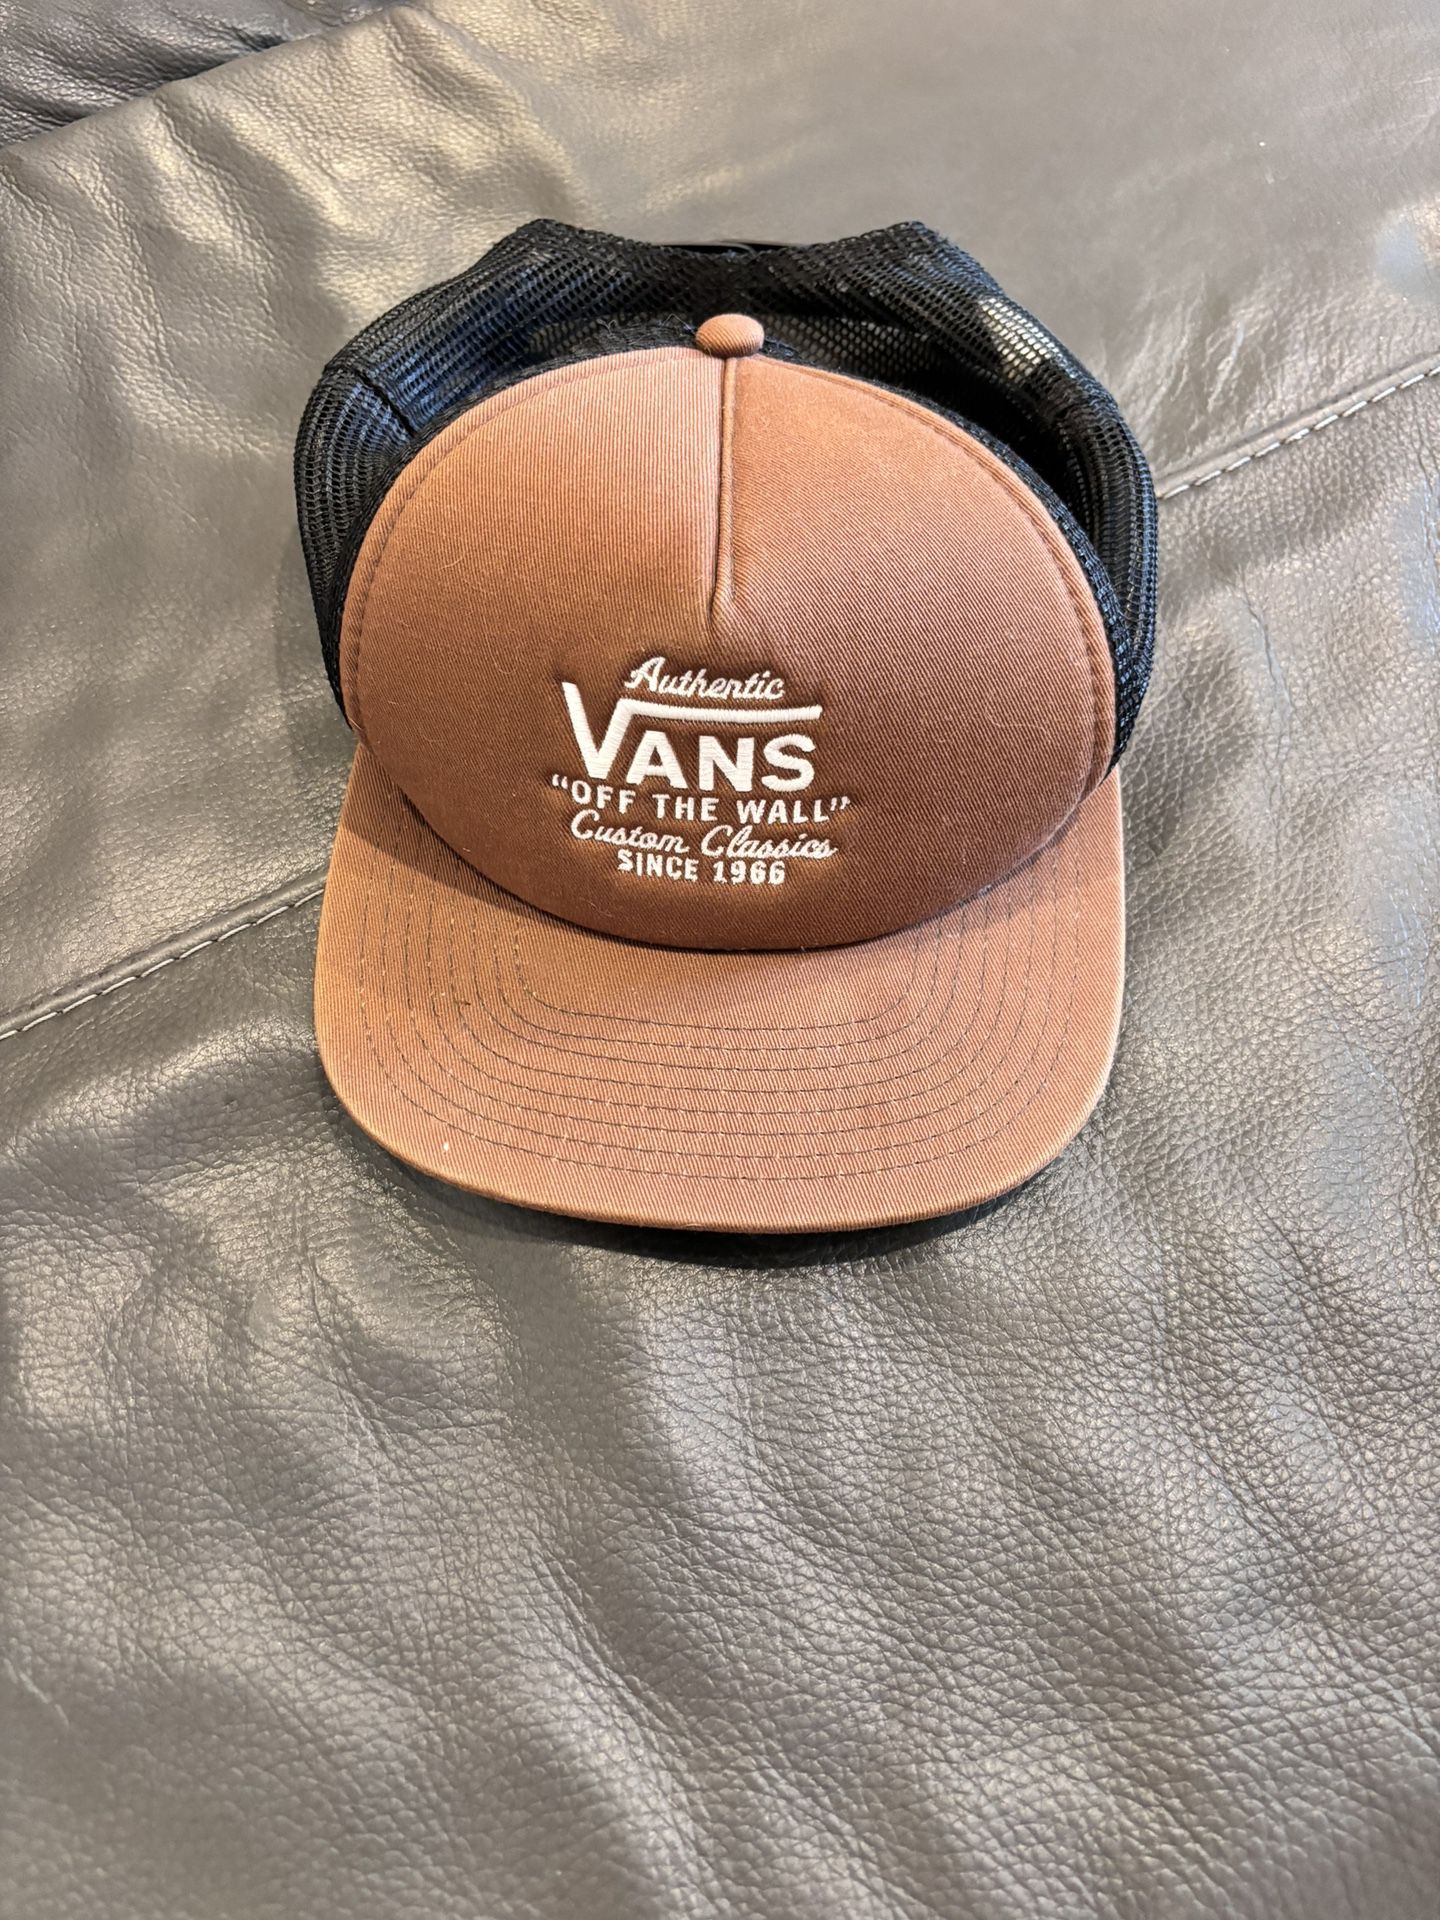 Vans Adult Size Hat Great Condition. Will hold with Venmo or if you’re on your way.